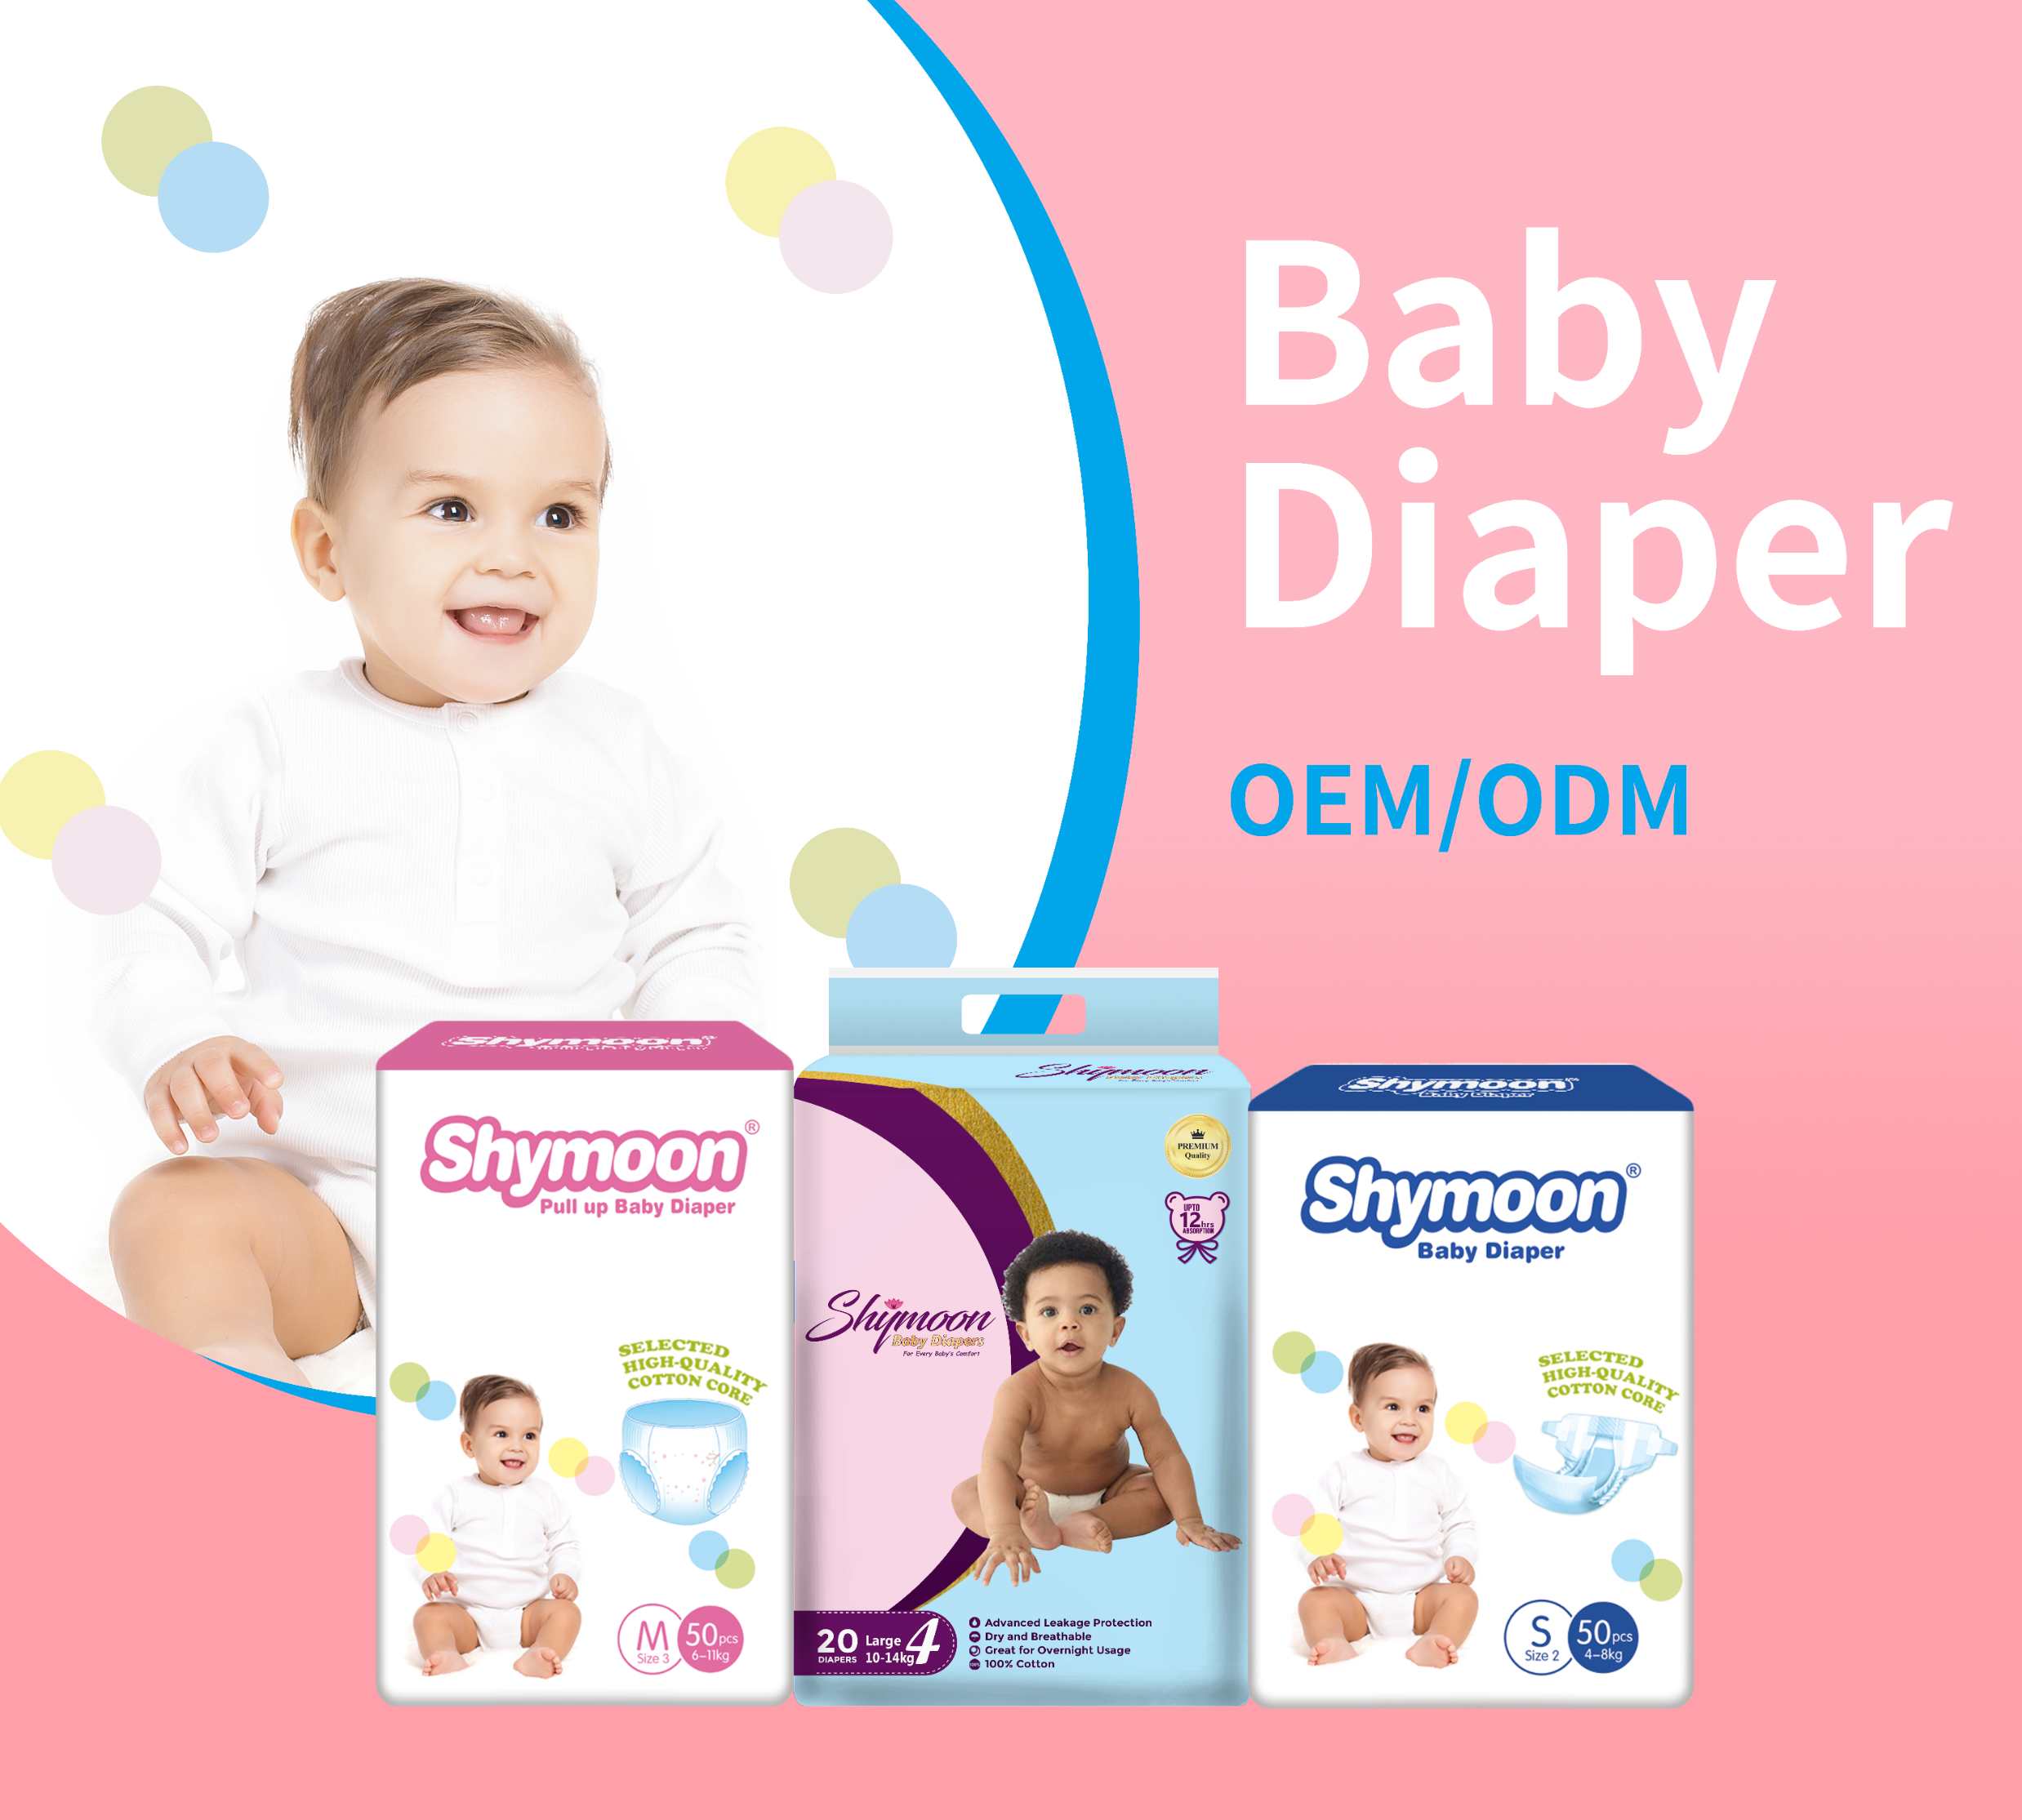 Do you know what commonly used materials are for diapers?